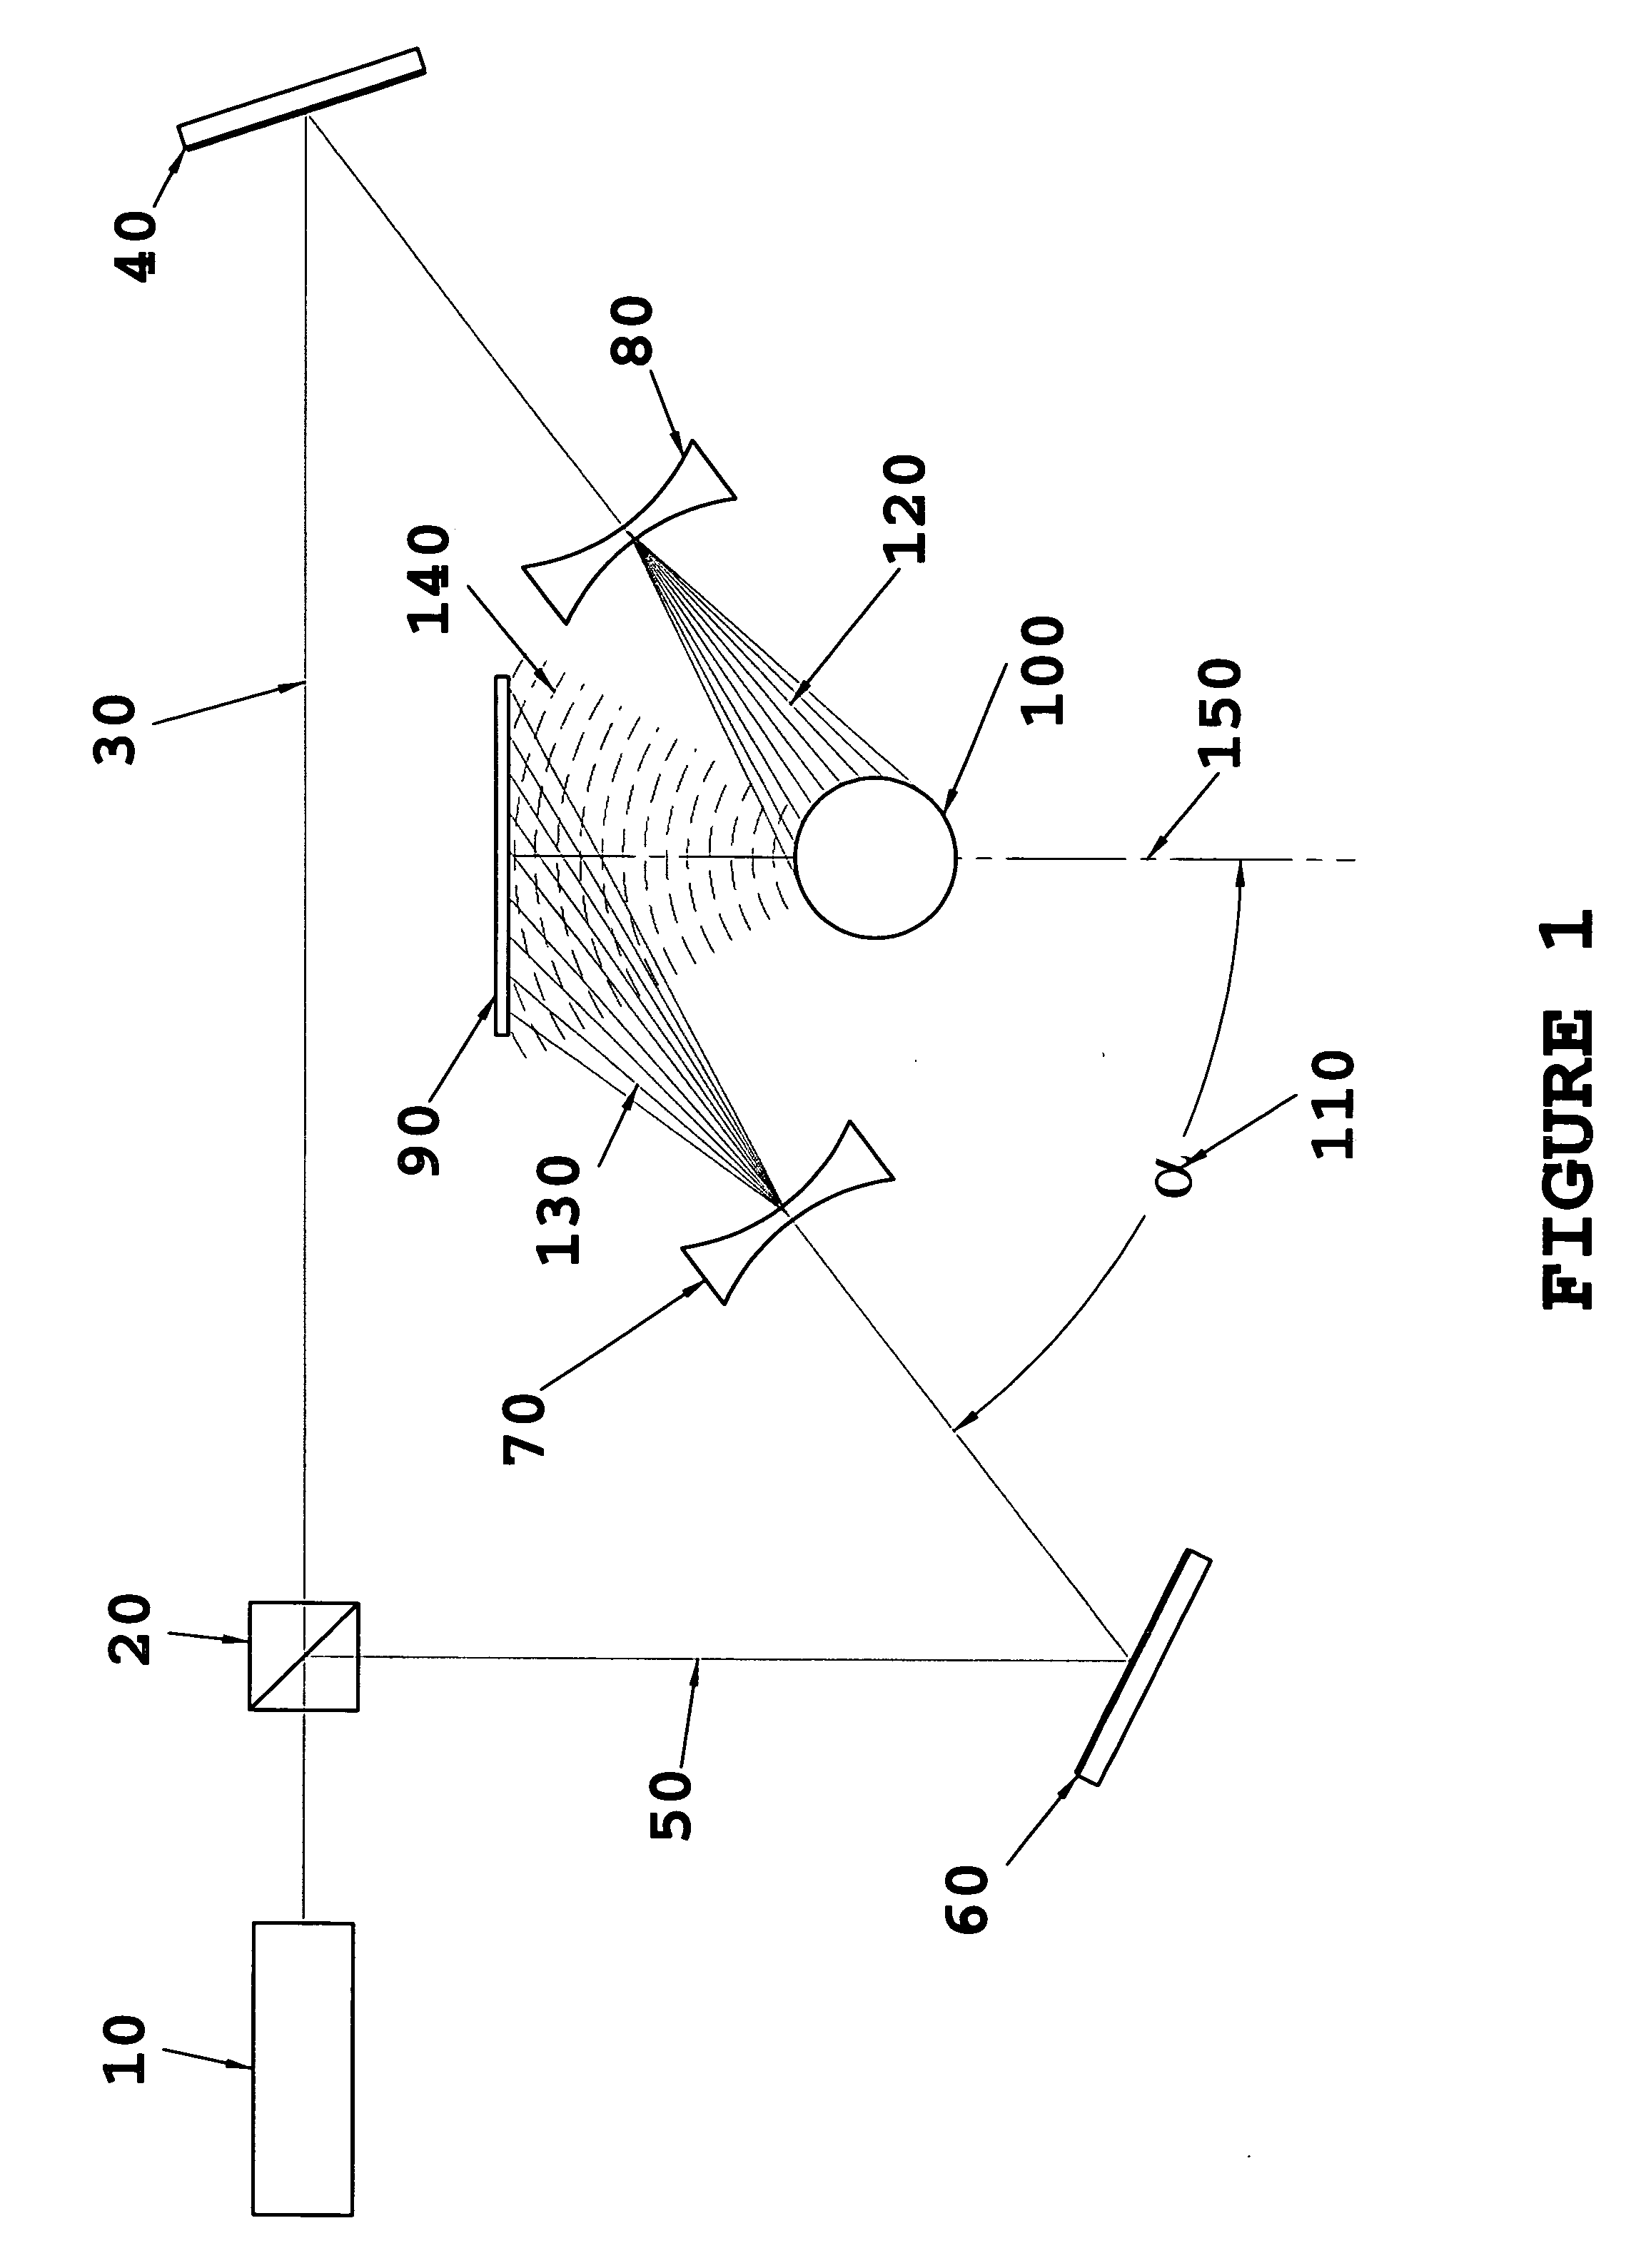 Method of producing and viewing 3-dimentional images and secure data encryption/decryption based on holographic means